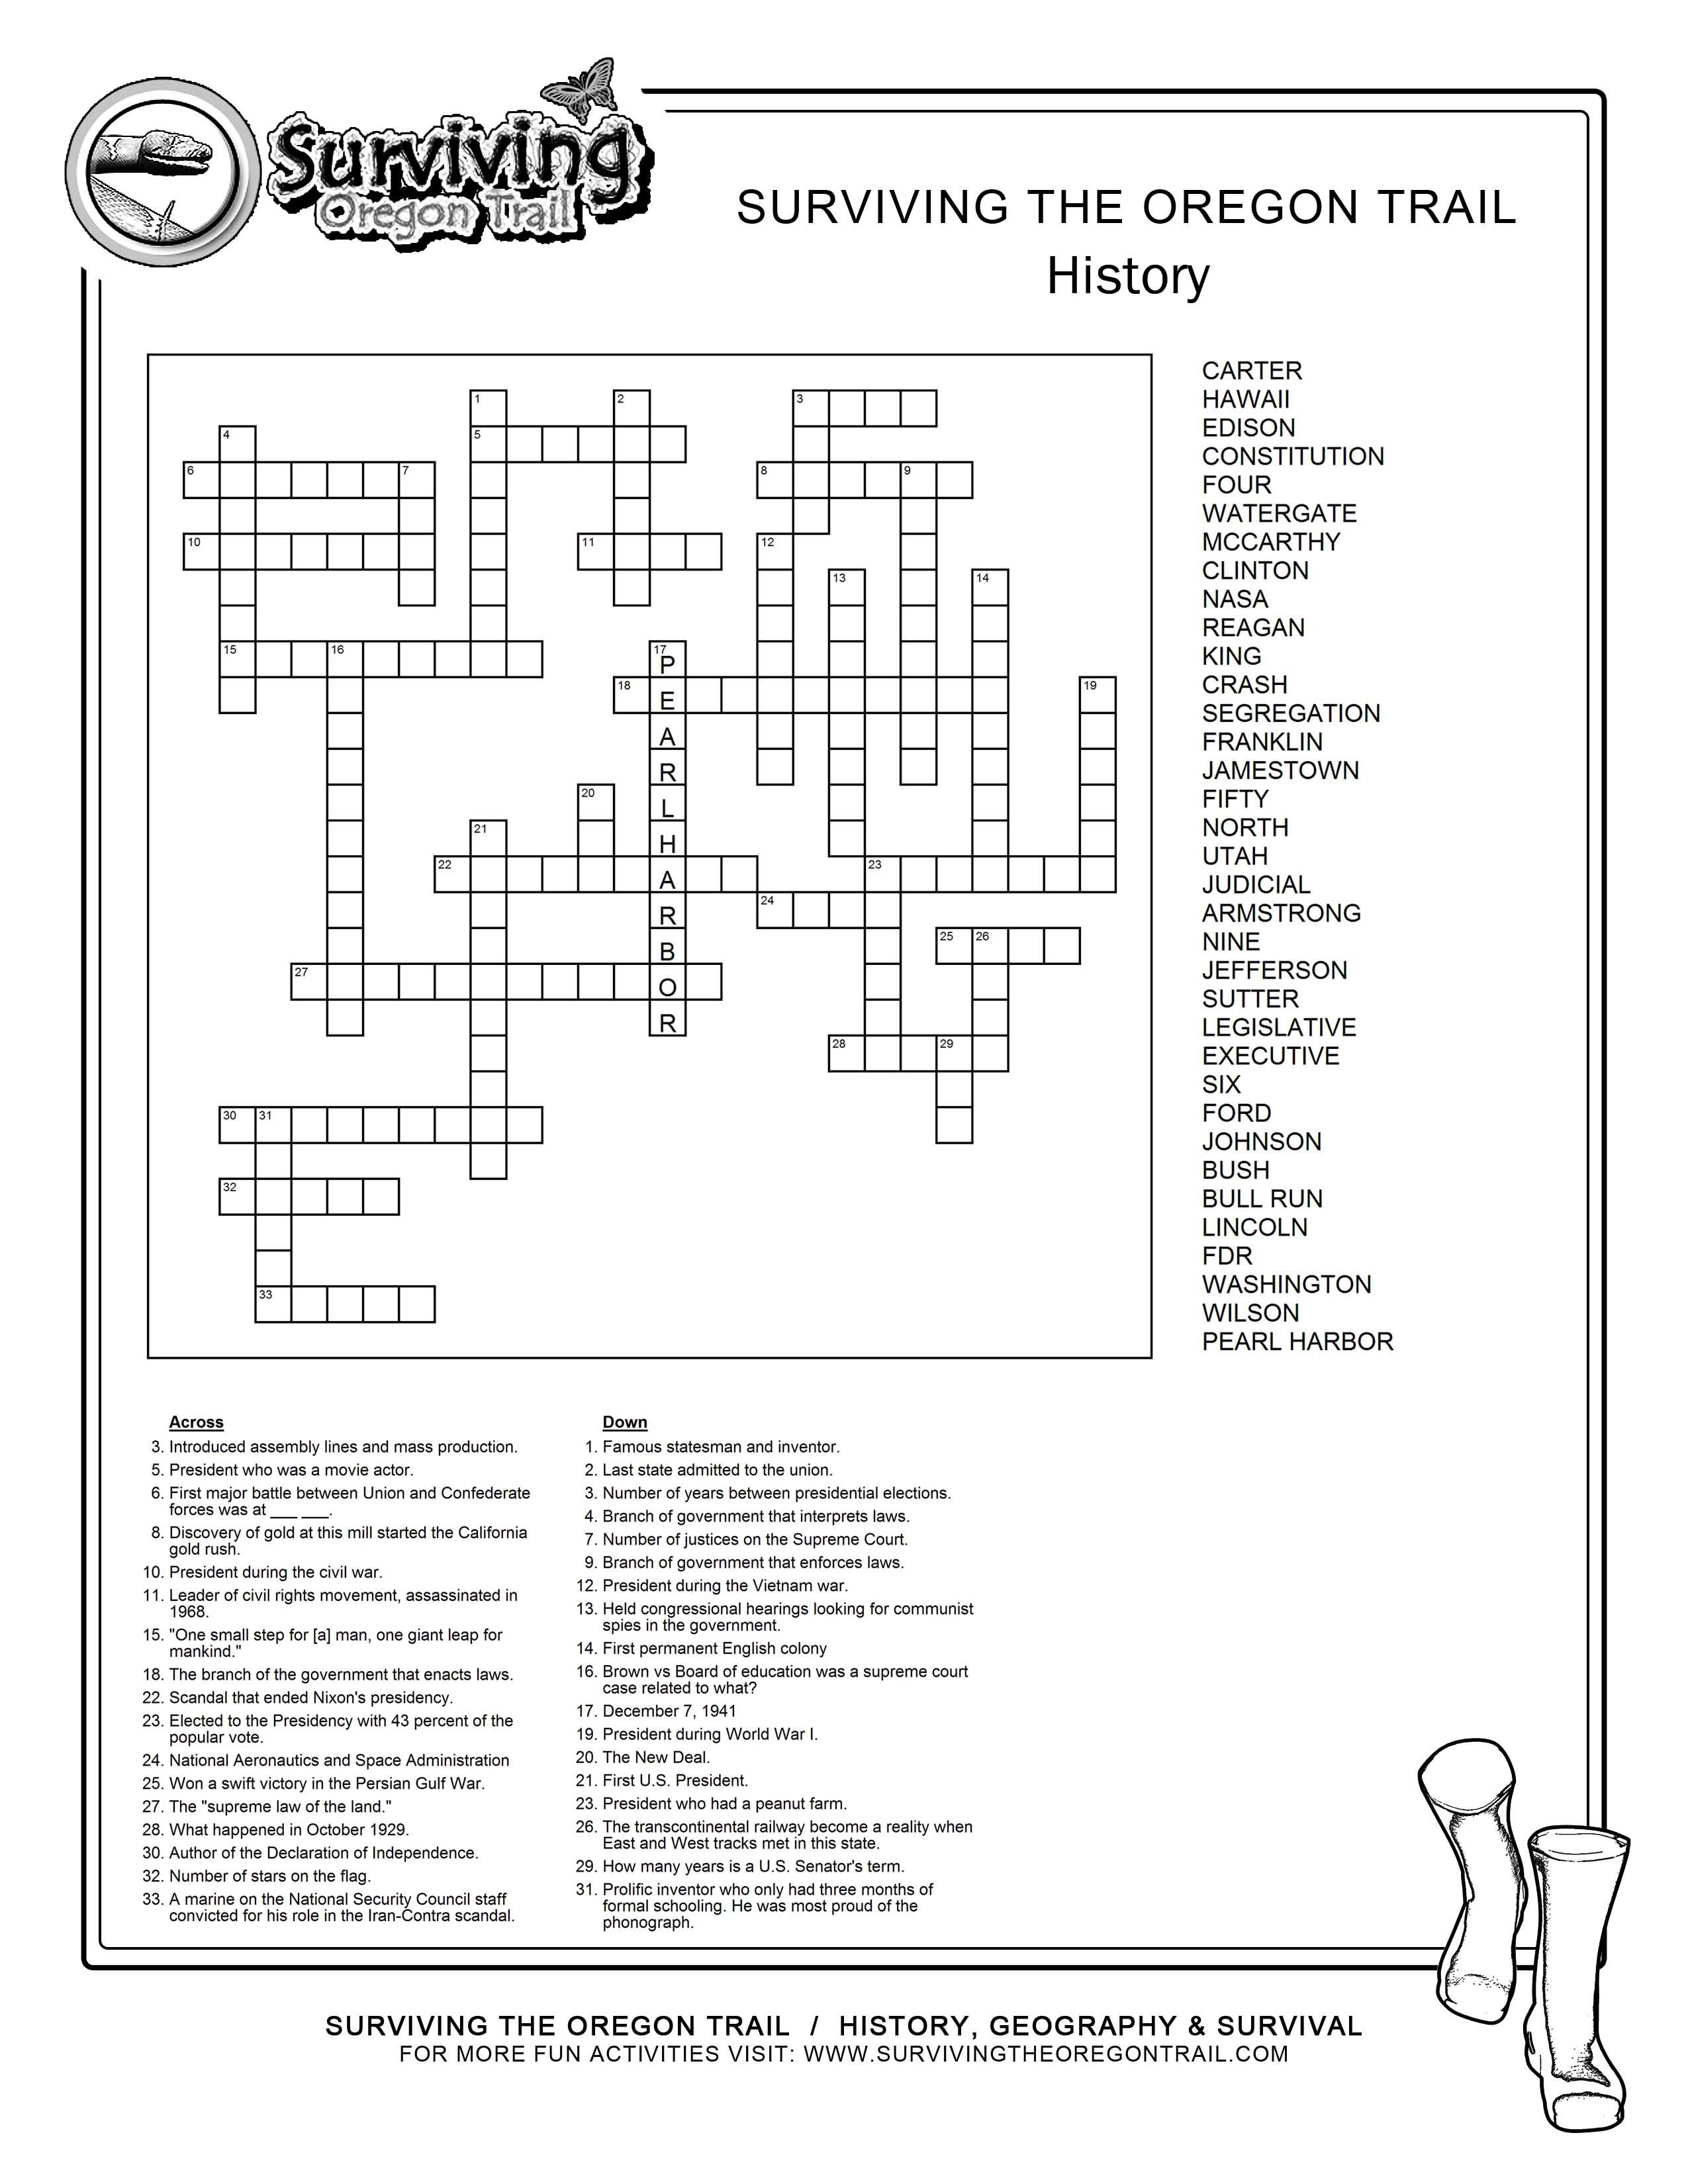 Fill Free To Save This Historical Crossword Puzzle To Your Computer - Printable Geography Puzzles